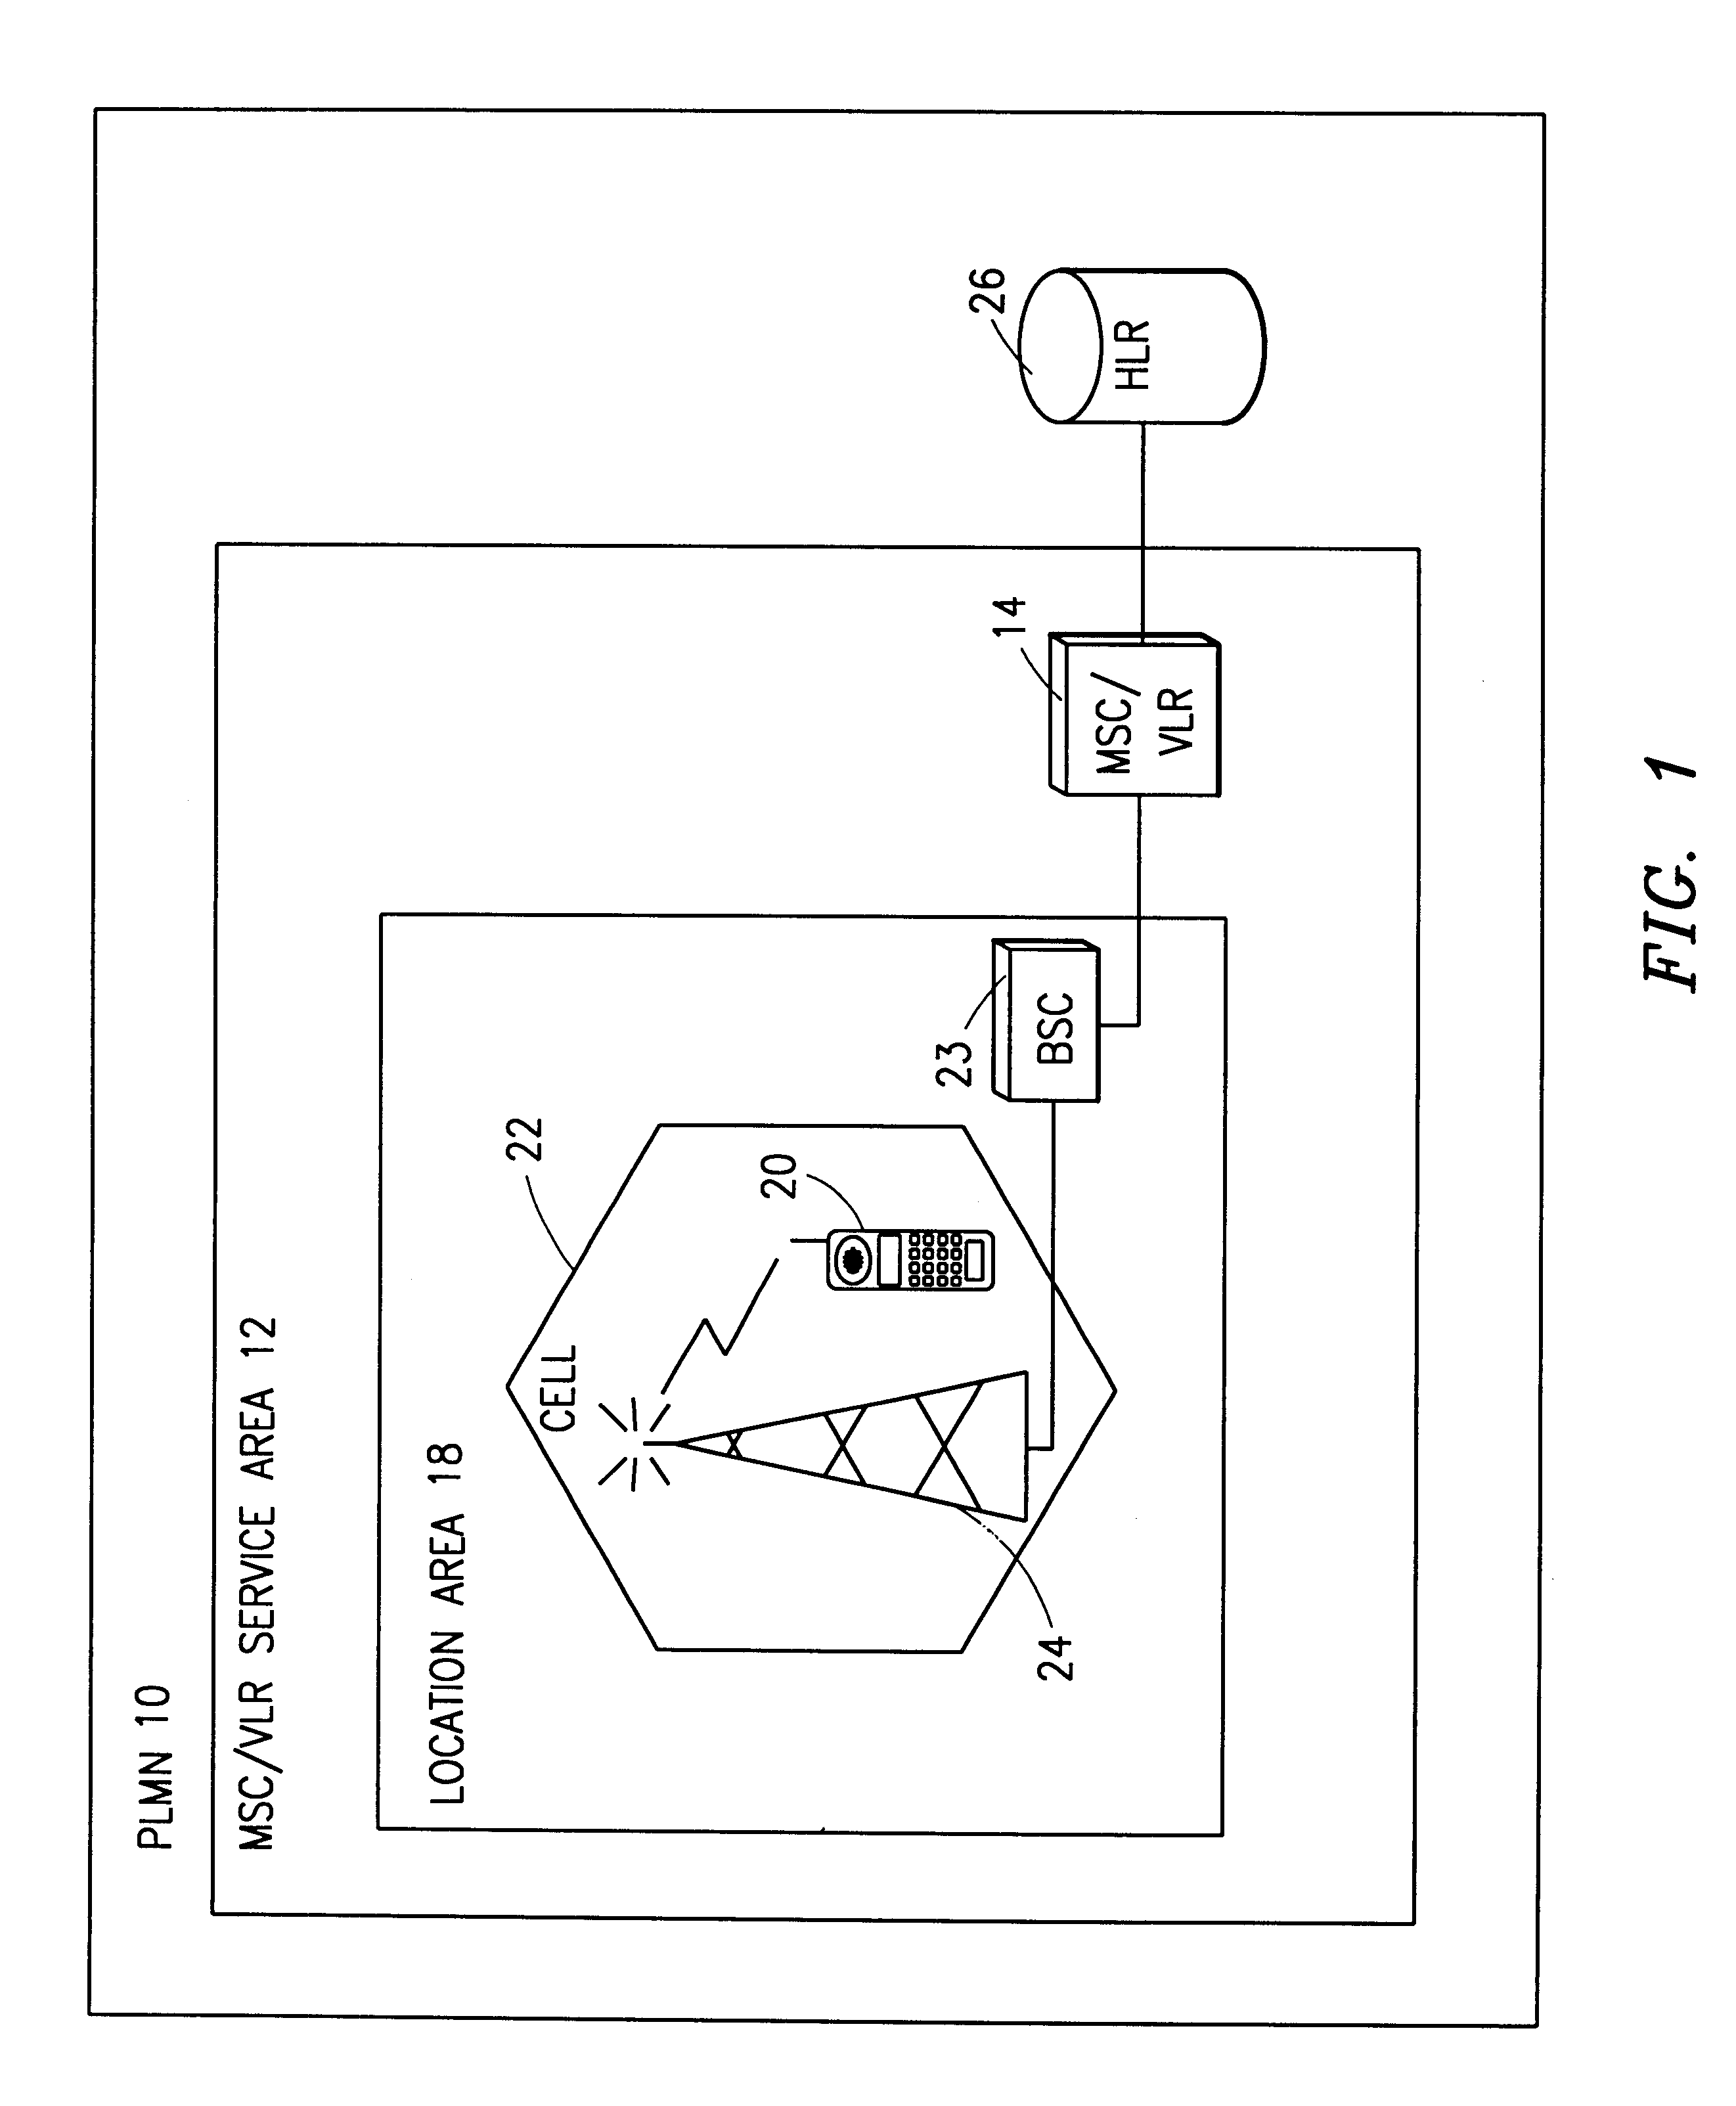 System and method for virtual citizen's band radio in a cellular network